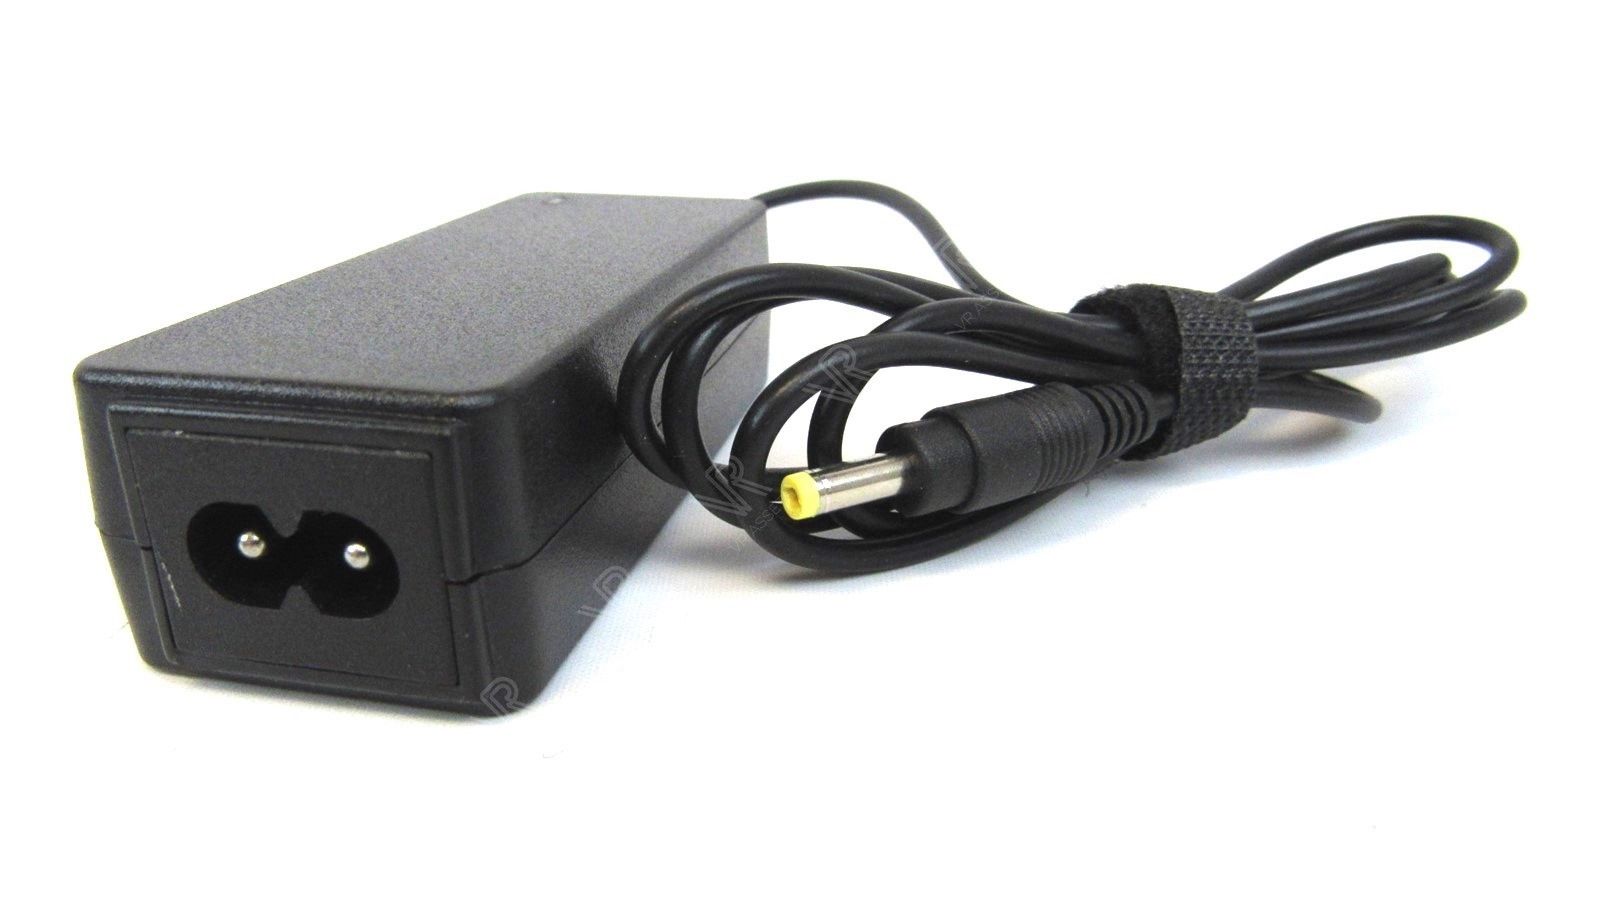 Laptop AC Adapter for HP Mini 700 1100 110 210 19V 1.58A 30W PP018H 496813-001